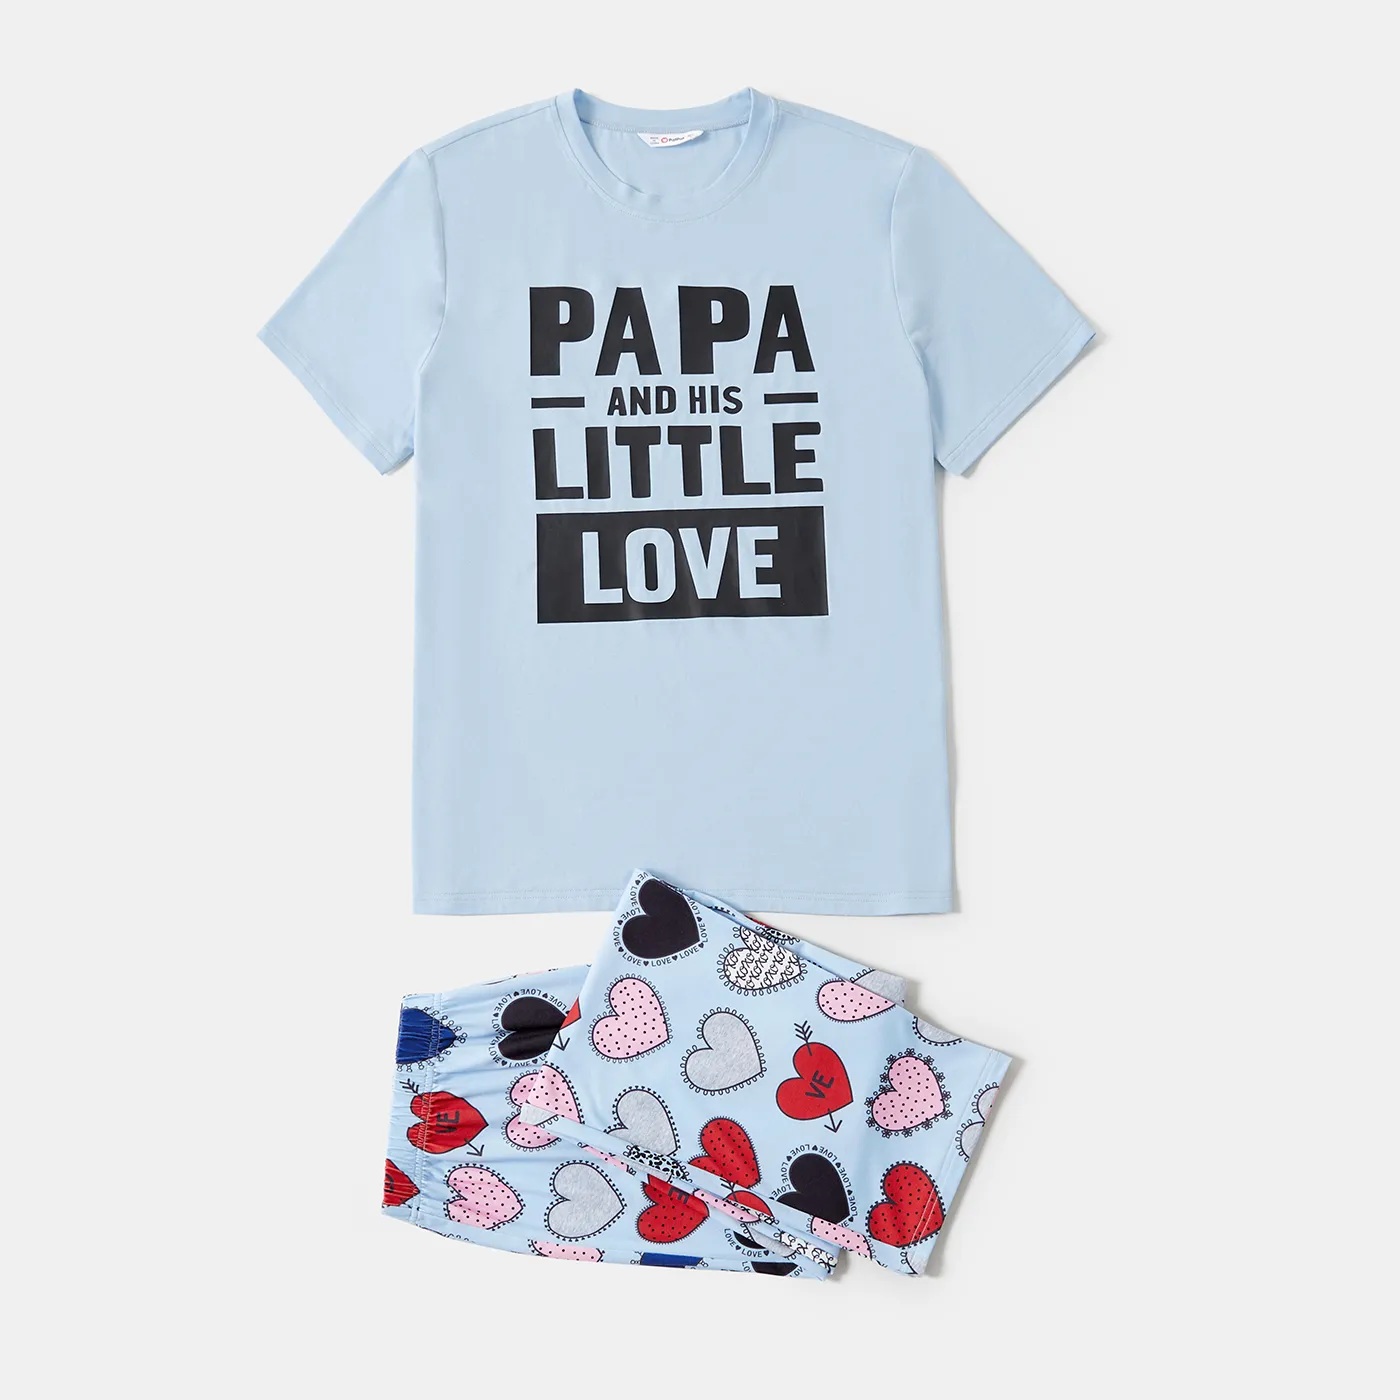 Valentine's Day Family Matching Letters & Heart Pattern Short-sleeve Pajamas Sets(Flame Resistant)